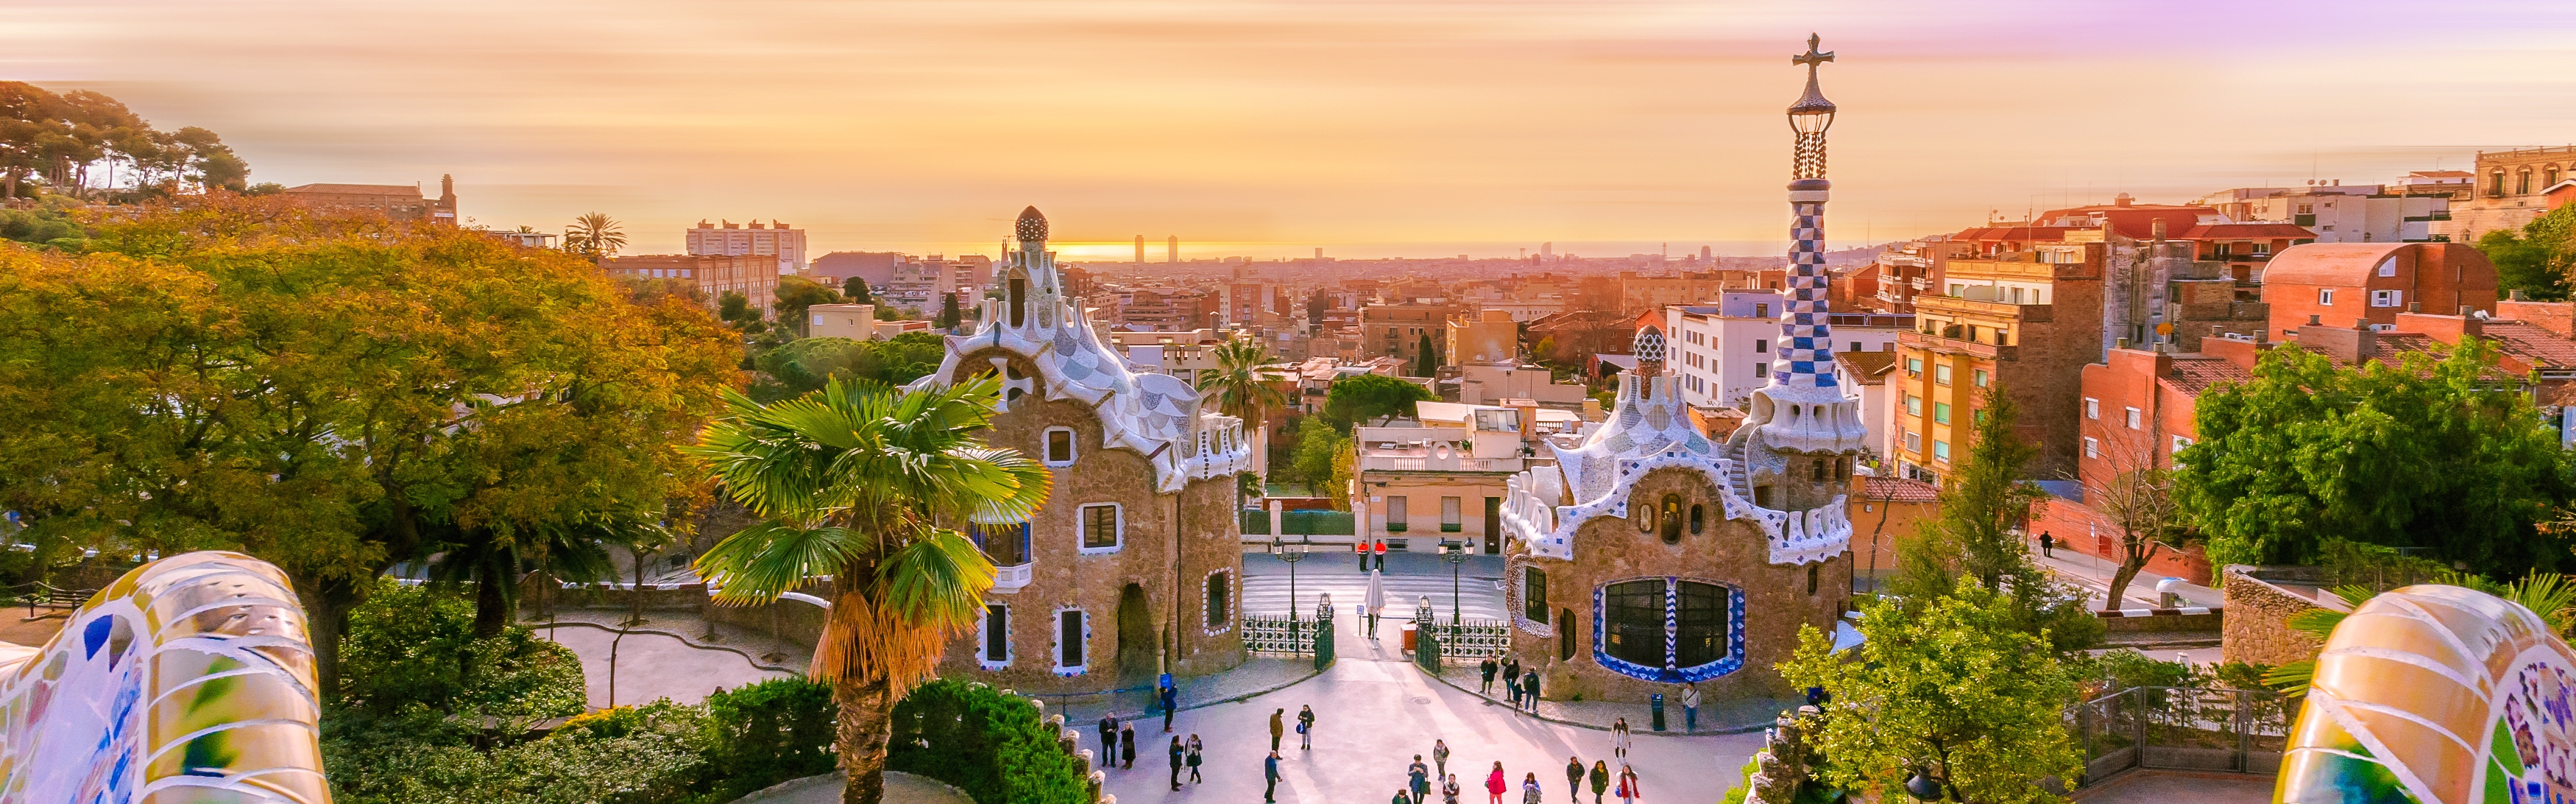 View of Park Guell at sunset